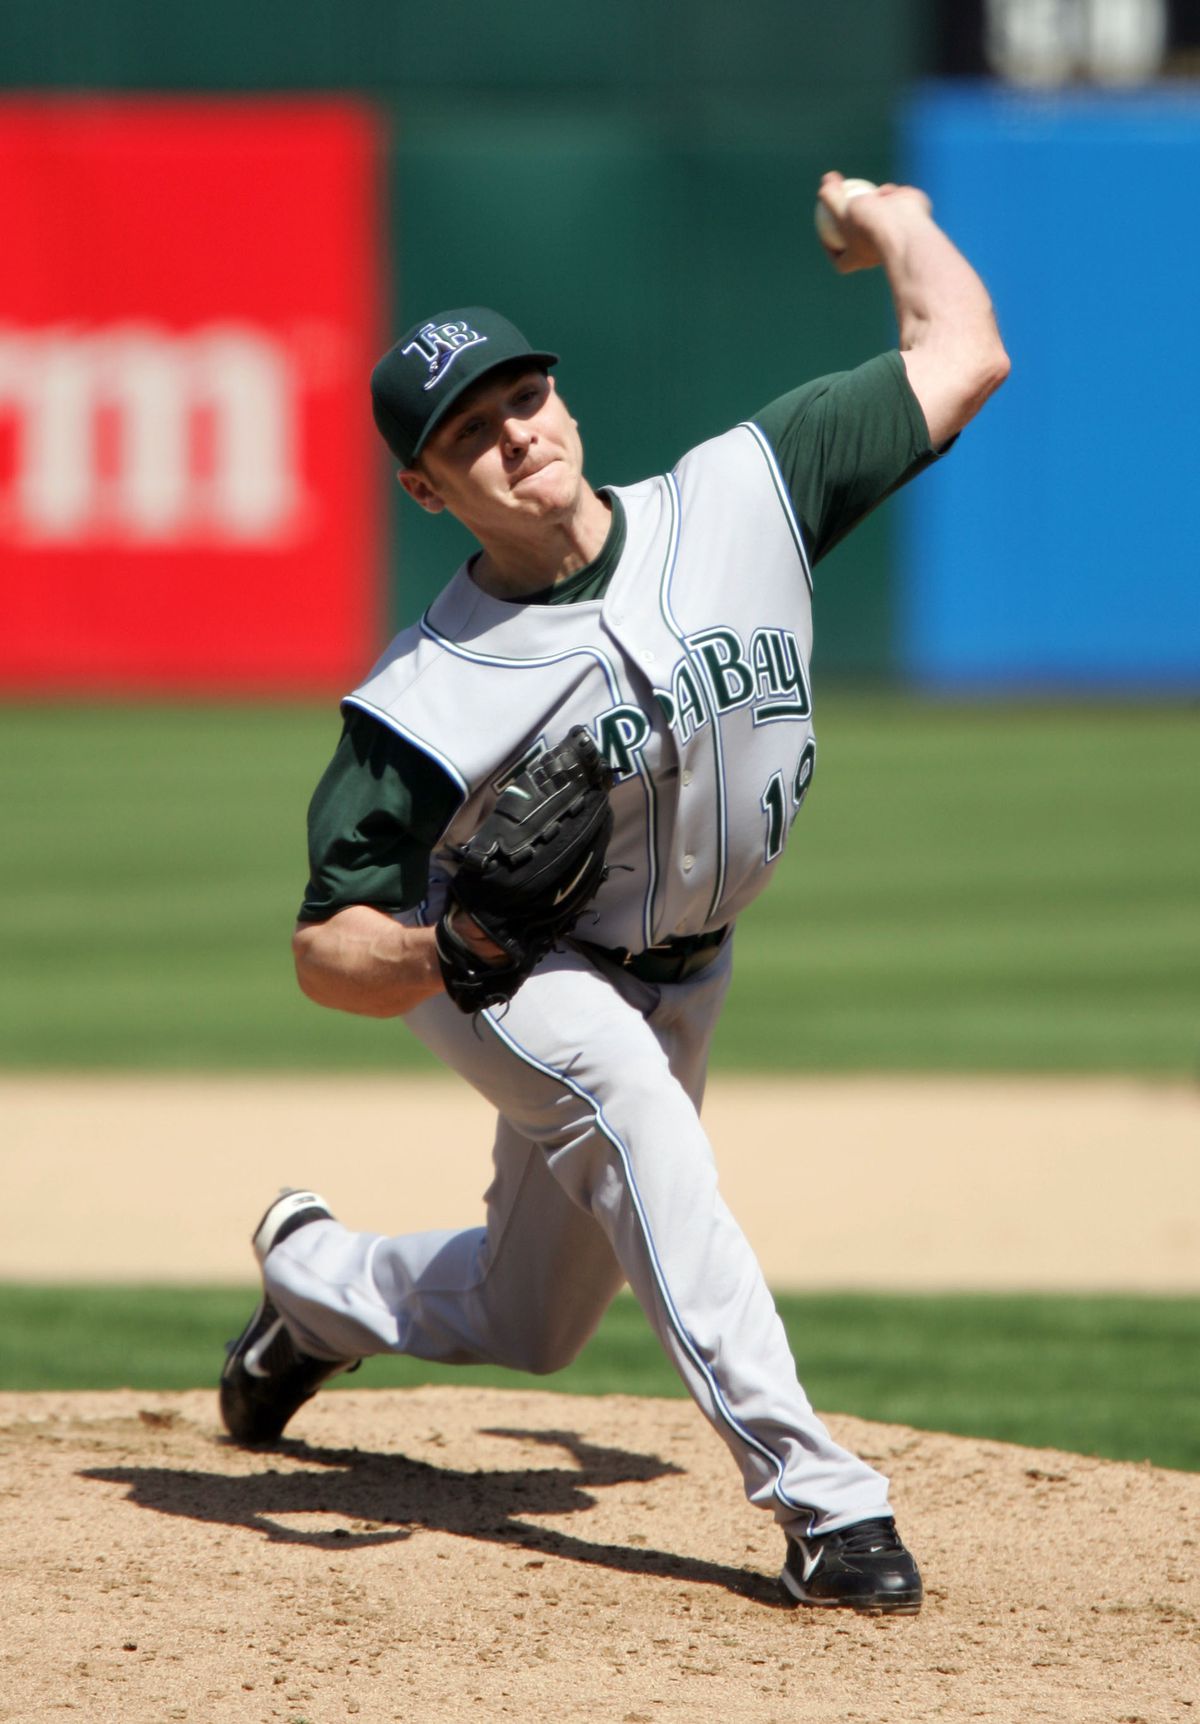 Kazmir delivers a pitch on April 29th, 2007